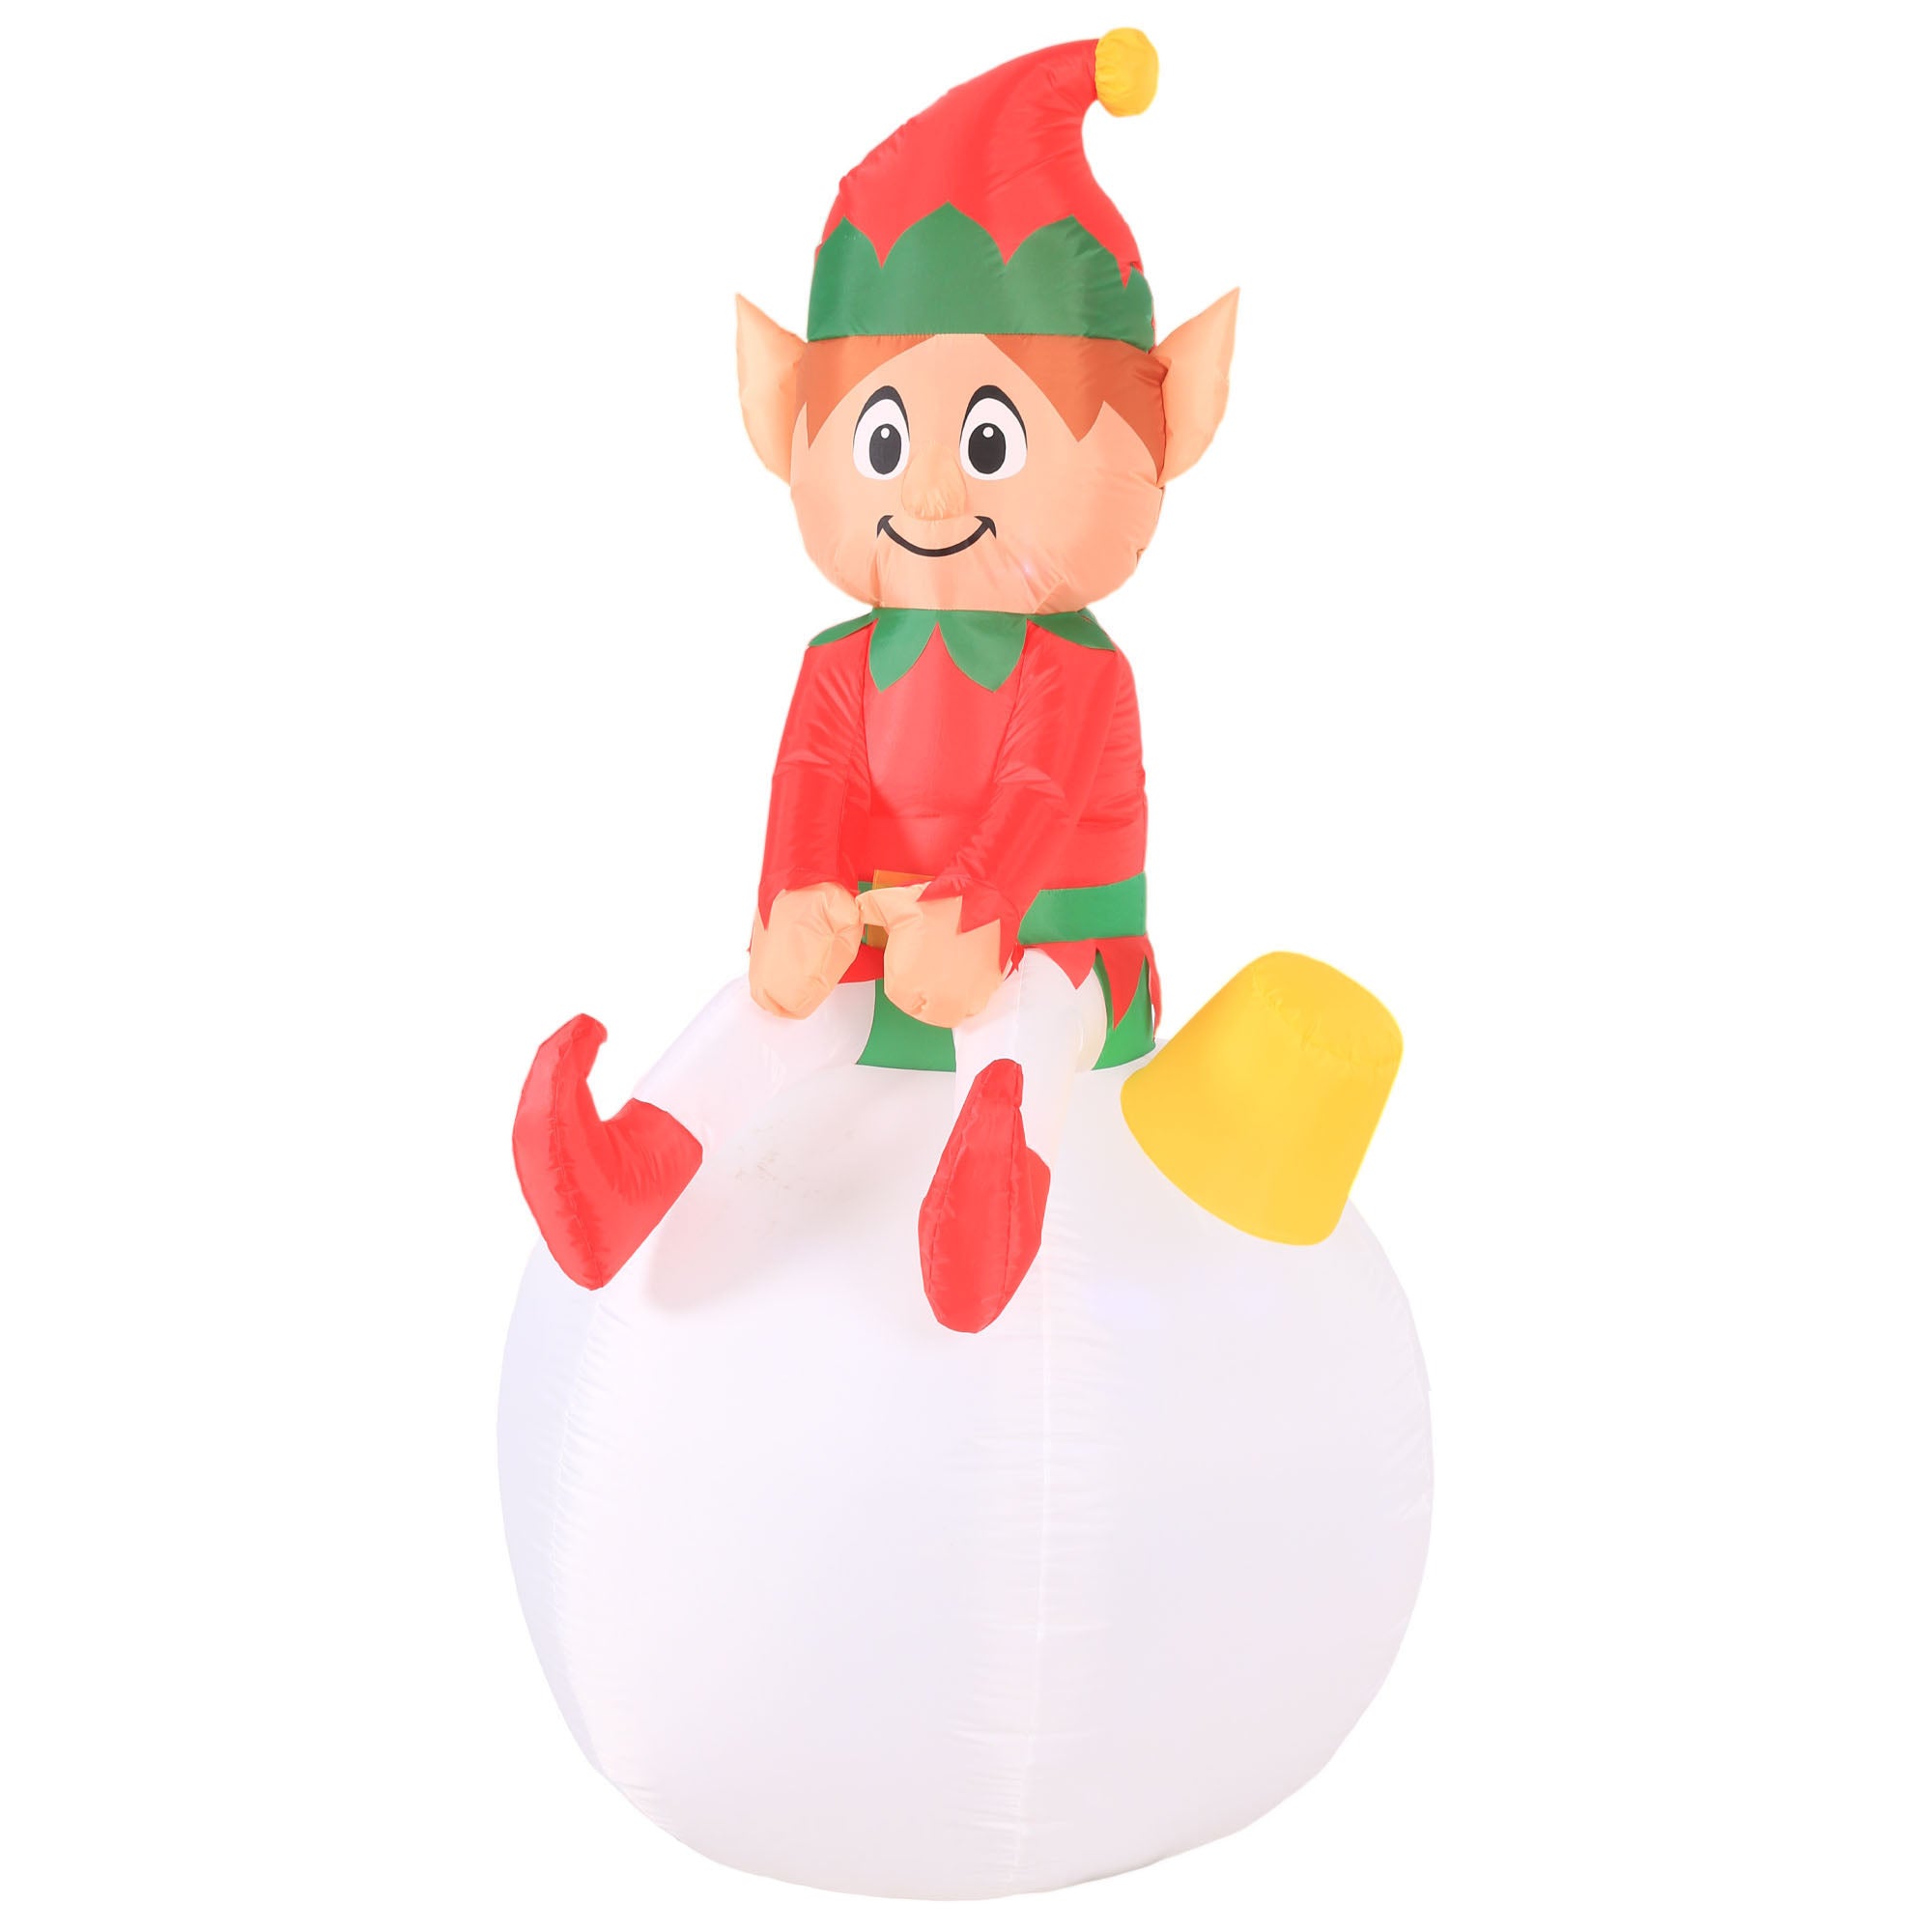 Occasions AIRFLOWZ INFLATABLE ELF ON ORNAMENT  5FT WITH SWIRLING LIGHTS, 5 ft Tall, Red